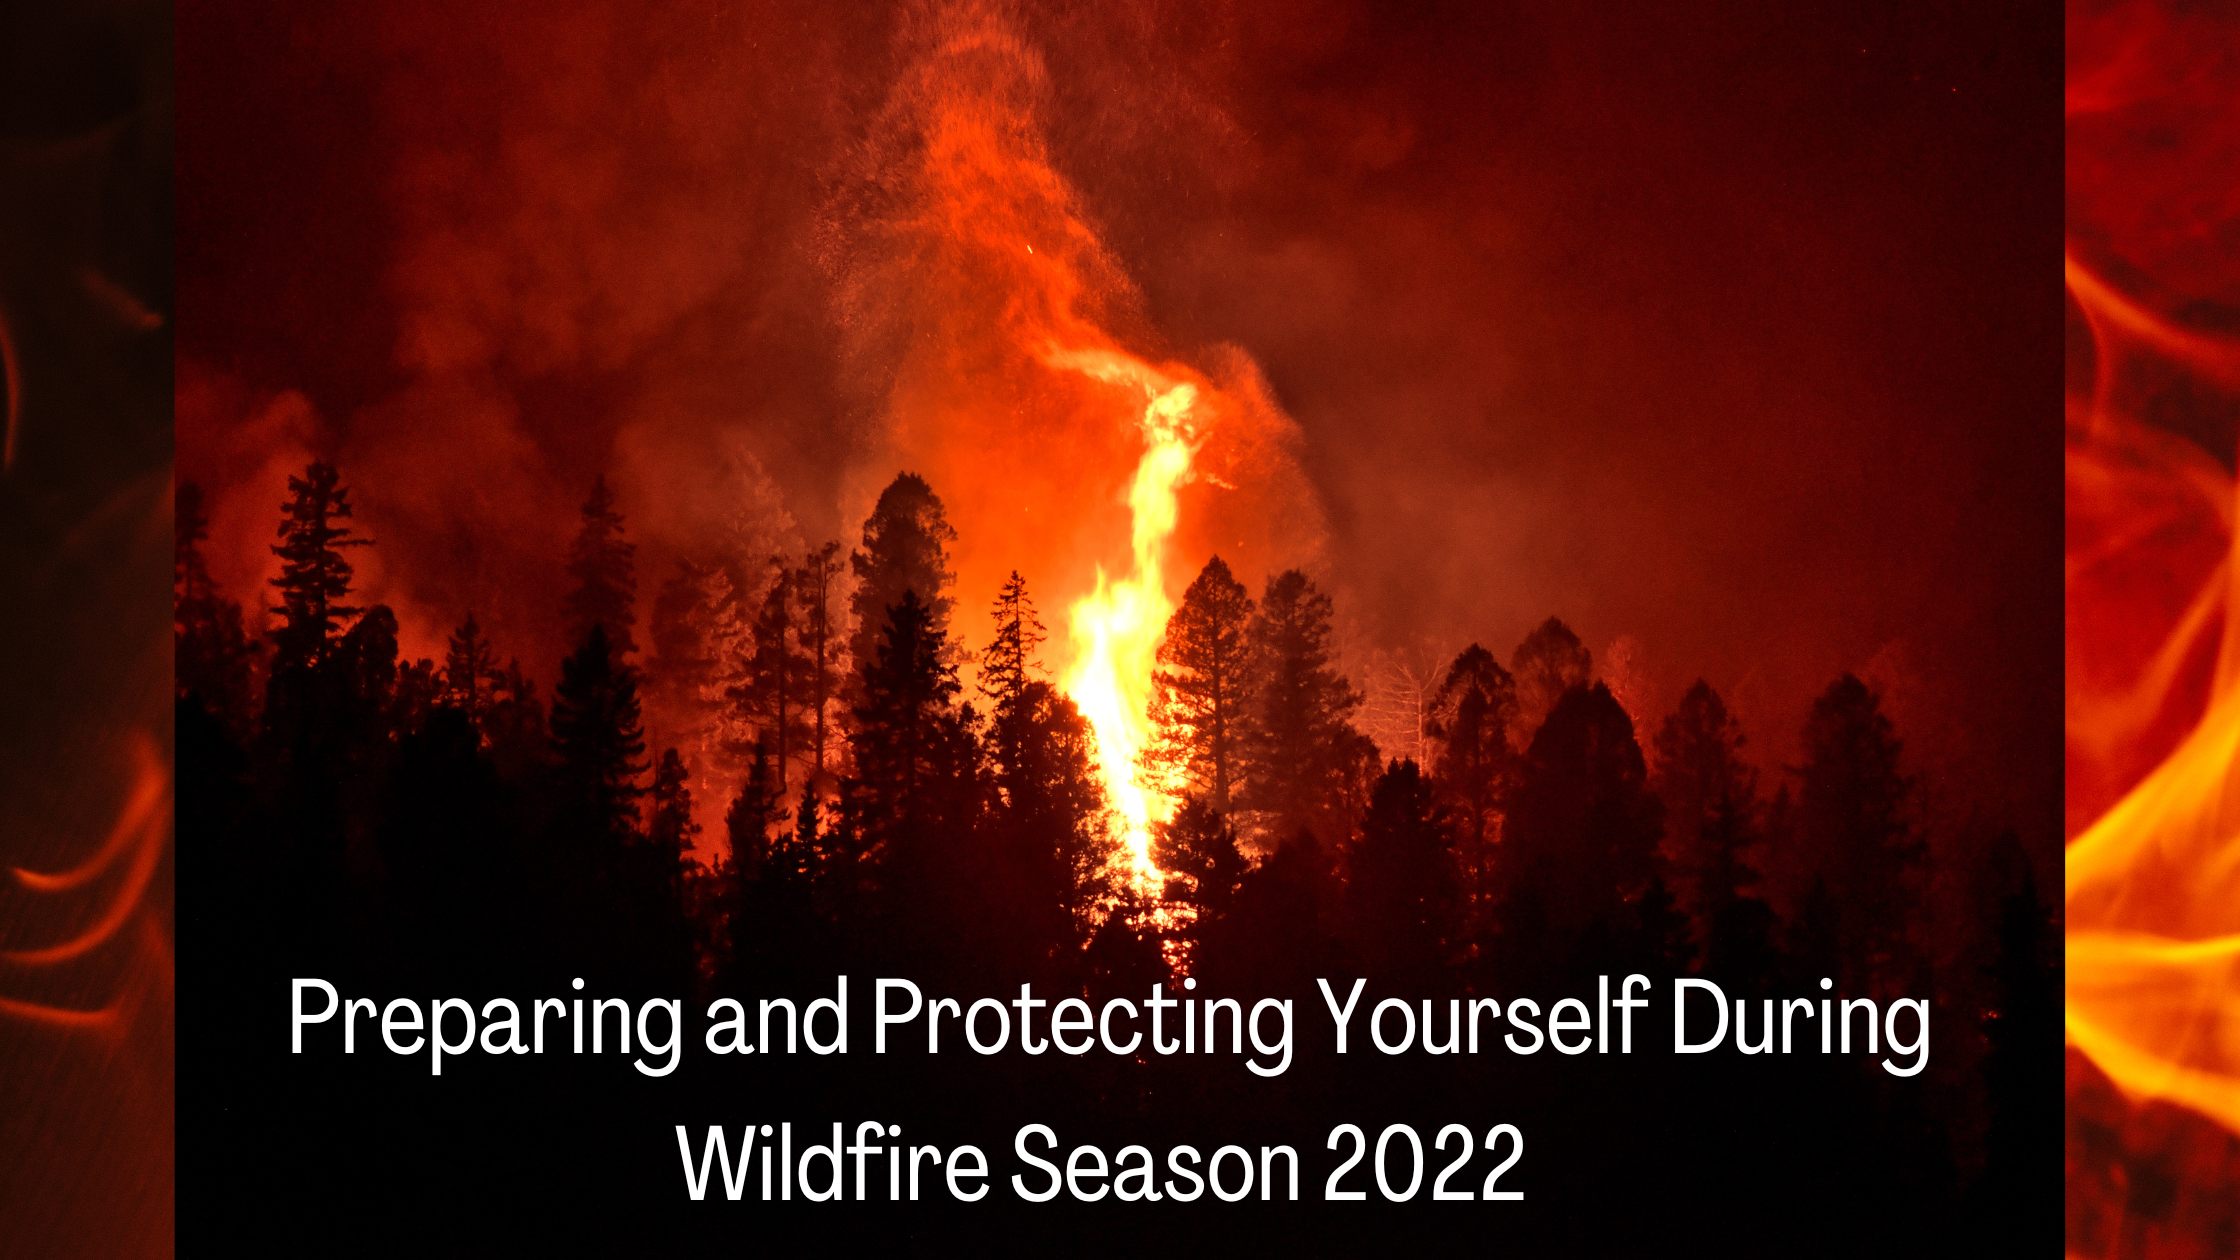 Preparing and Protecting Yourself During Wildfire Season 2022